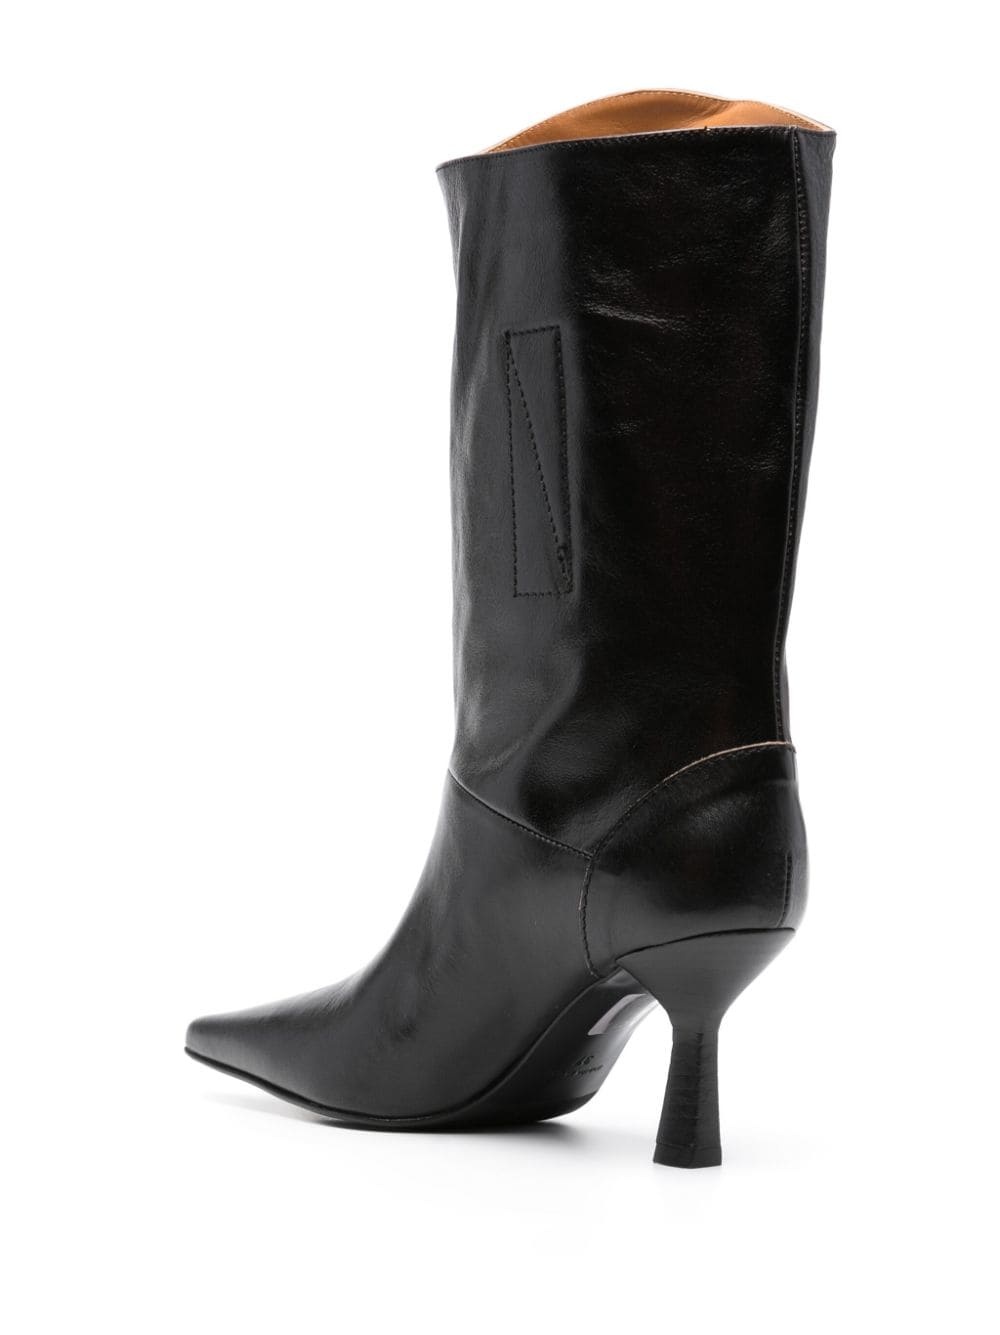 Envelope 100mm leather boots - 3